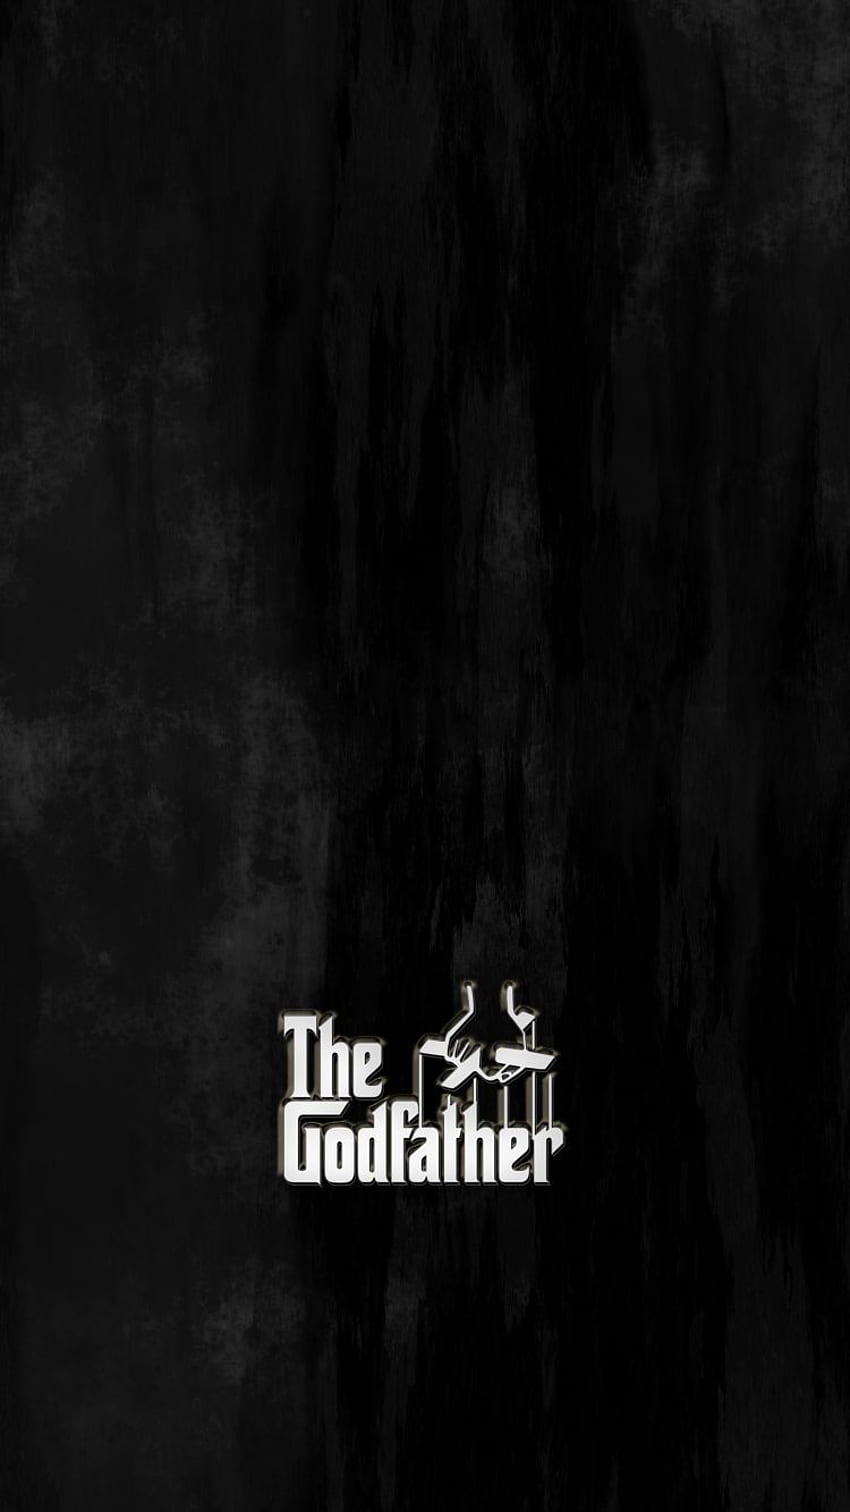 The Godfather iPhone Michael Corleone Vito Corleone. The godfather , The godfather, The godfather poster, The Godfather 3 HD phone wallpaper